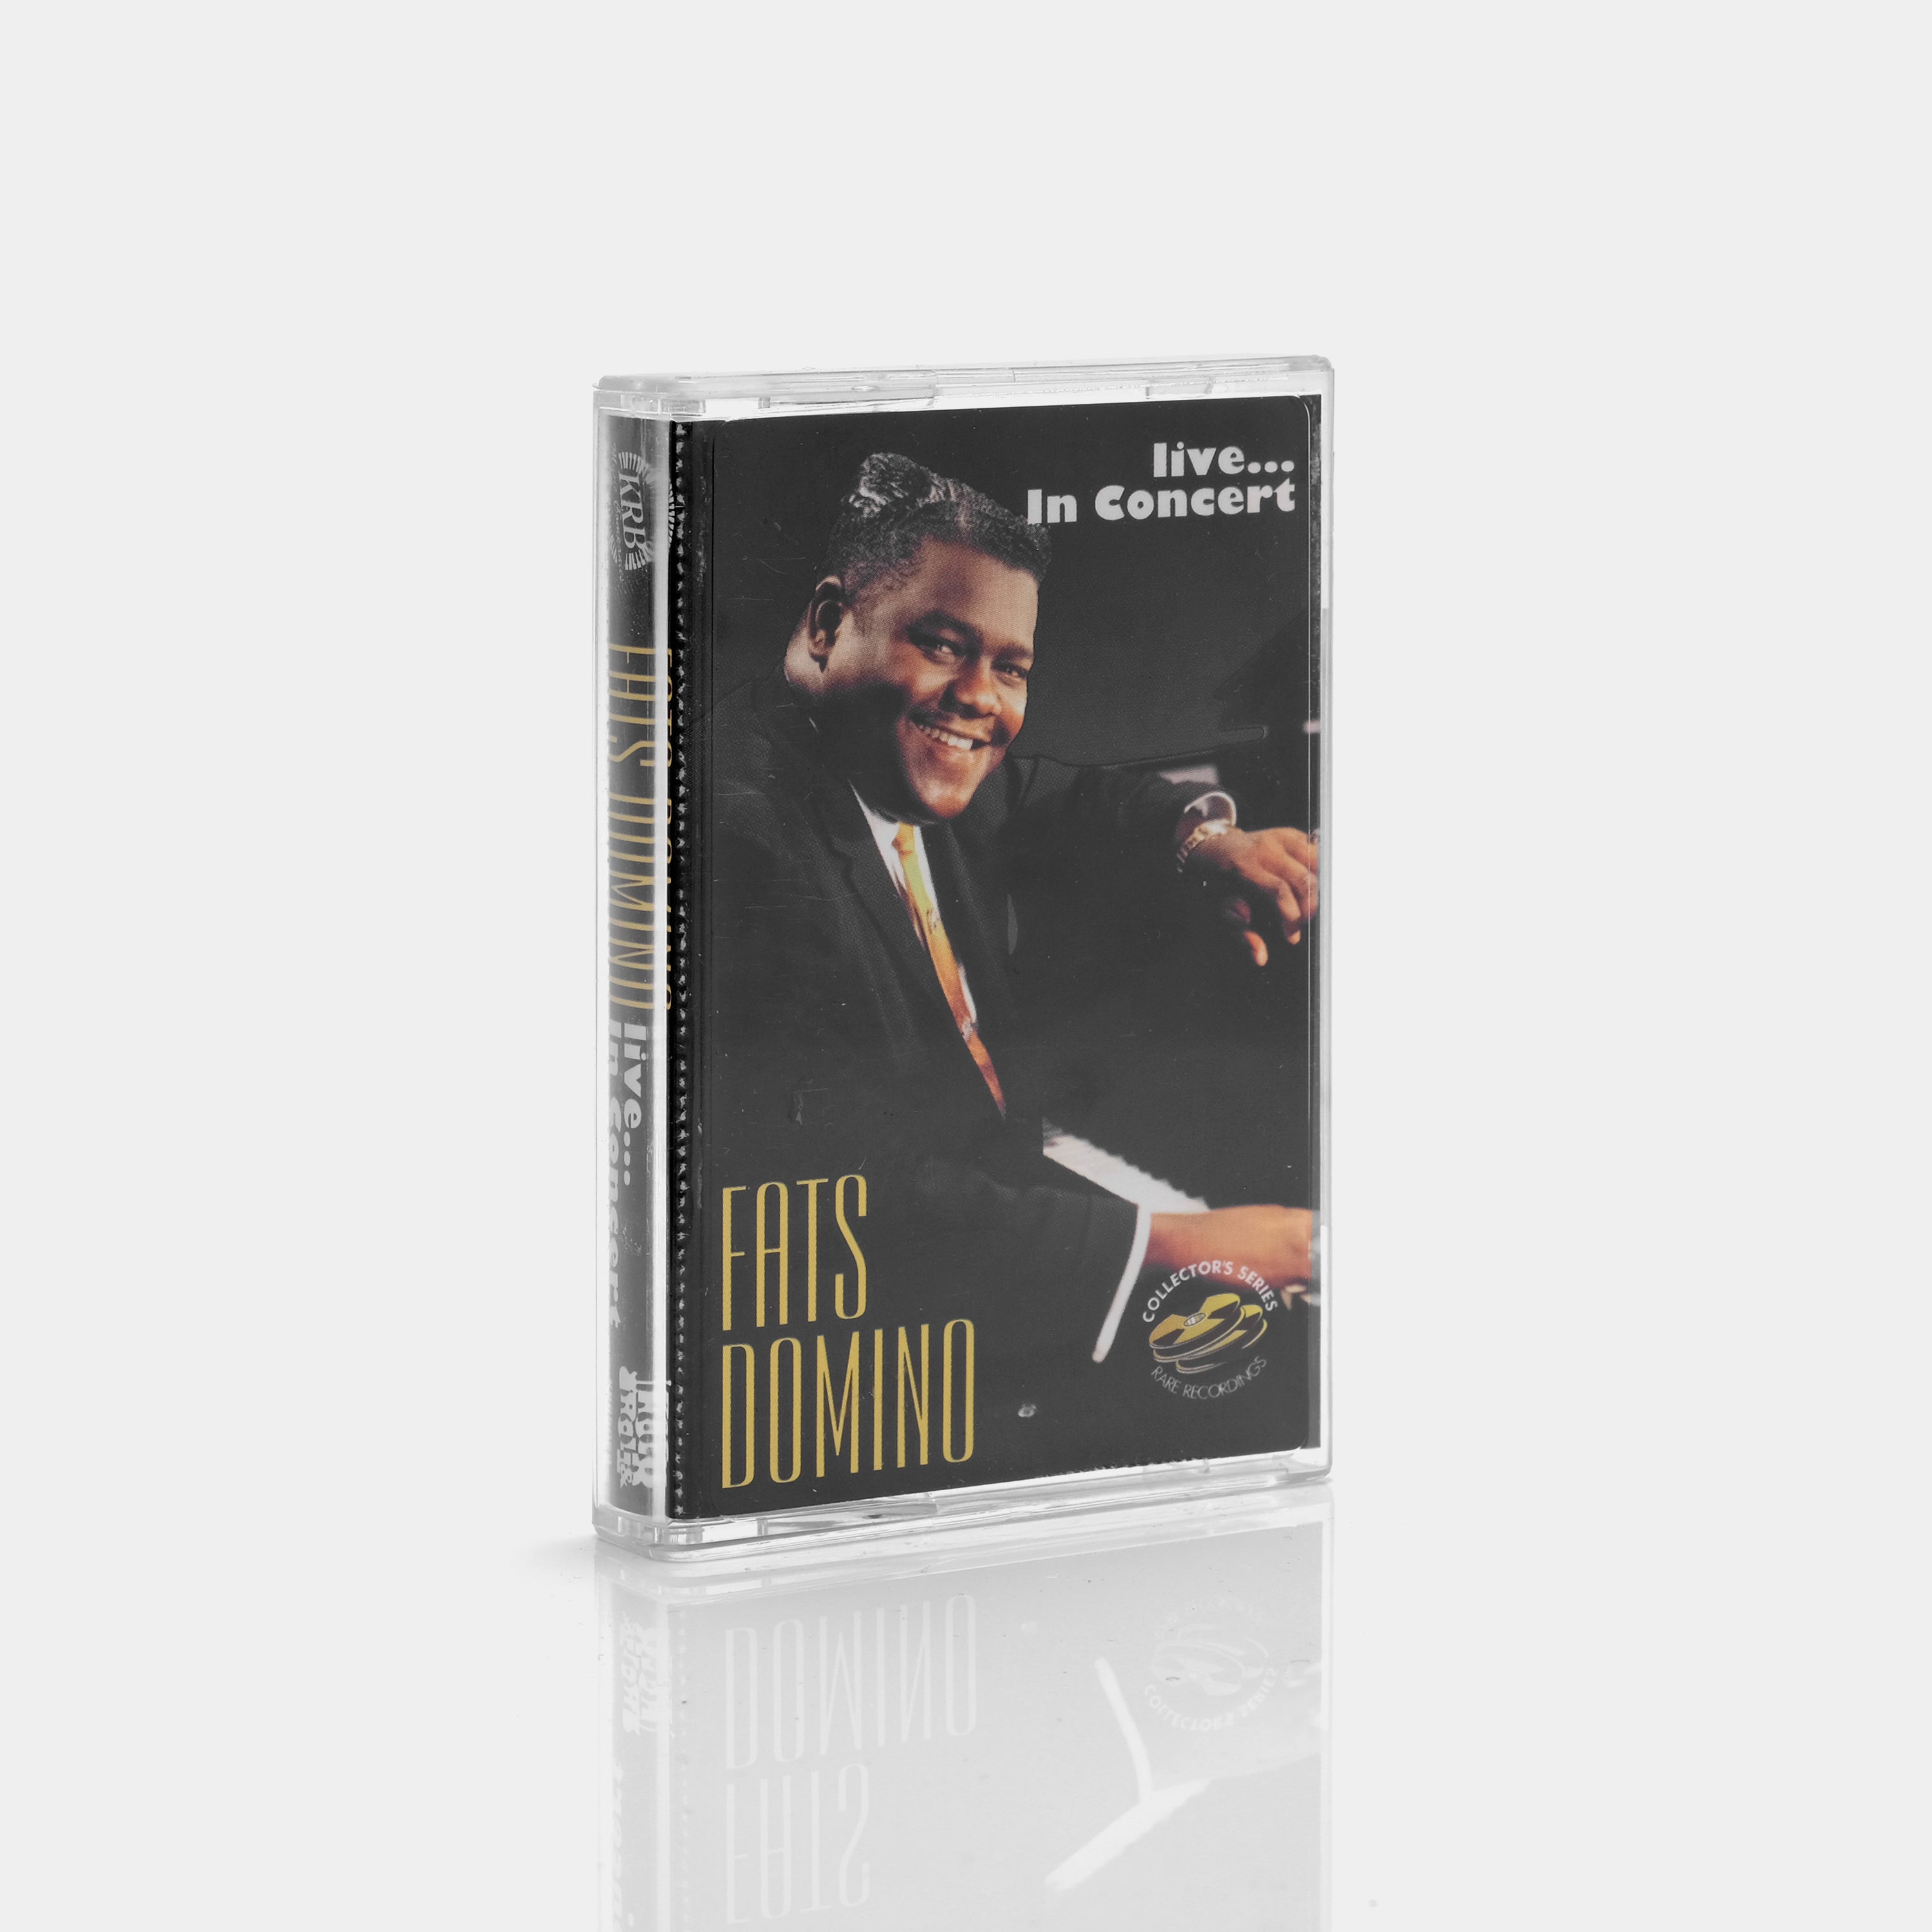 Fats Domino - Live... In Concert Cassette Tape